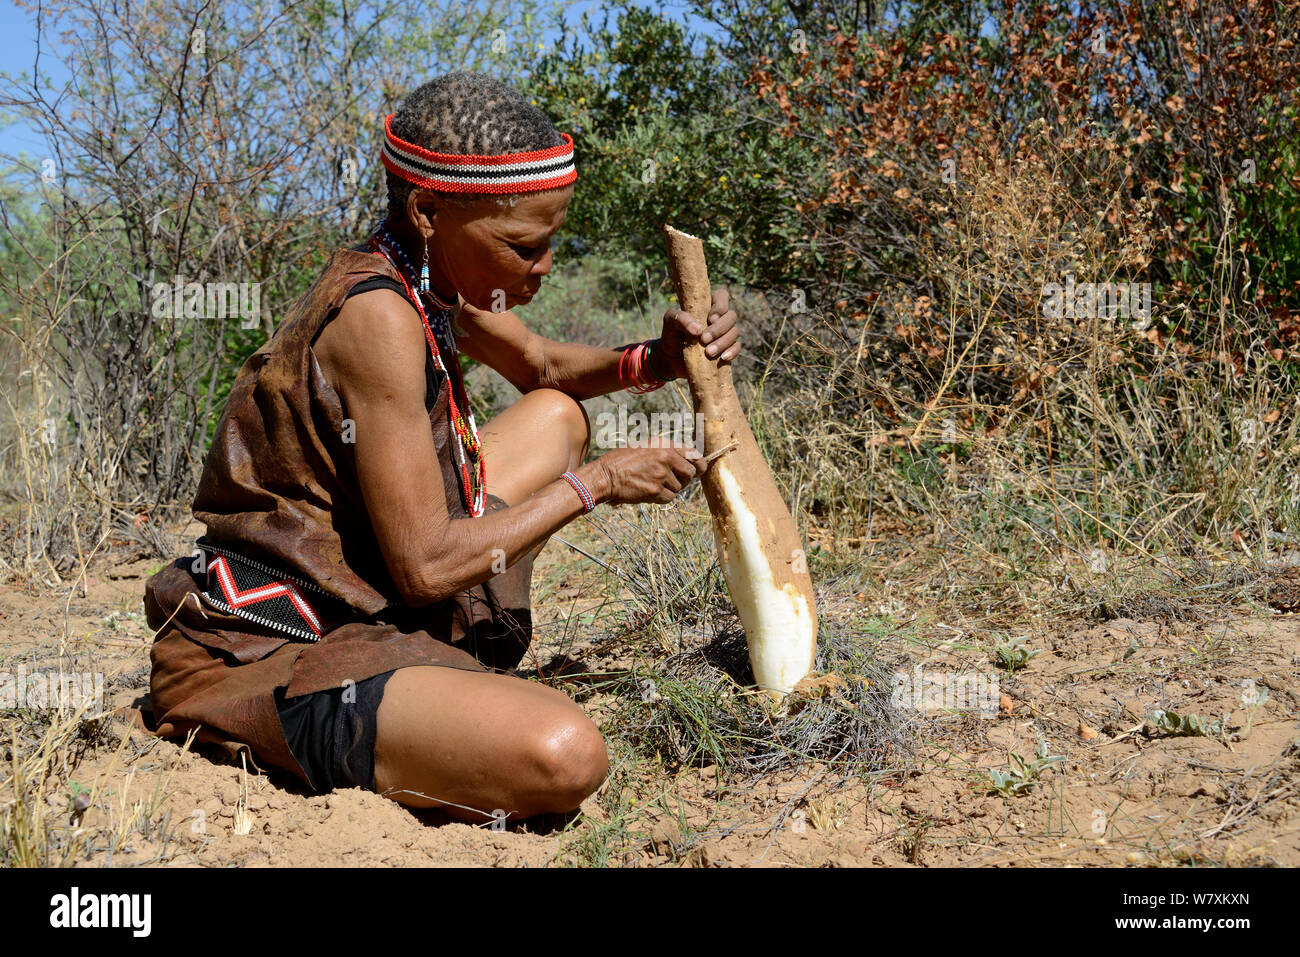 Naro San woman in the bush, peeling the root of a kombrua plant which is nutritious and thirst-quenching. Kalahari, Ghanzi region, Botswana, Africa. Dry season, October 2014. Stock Photo